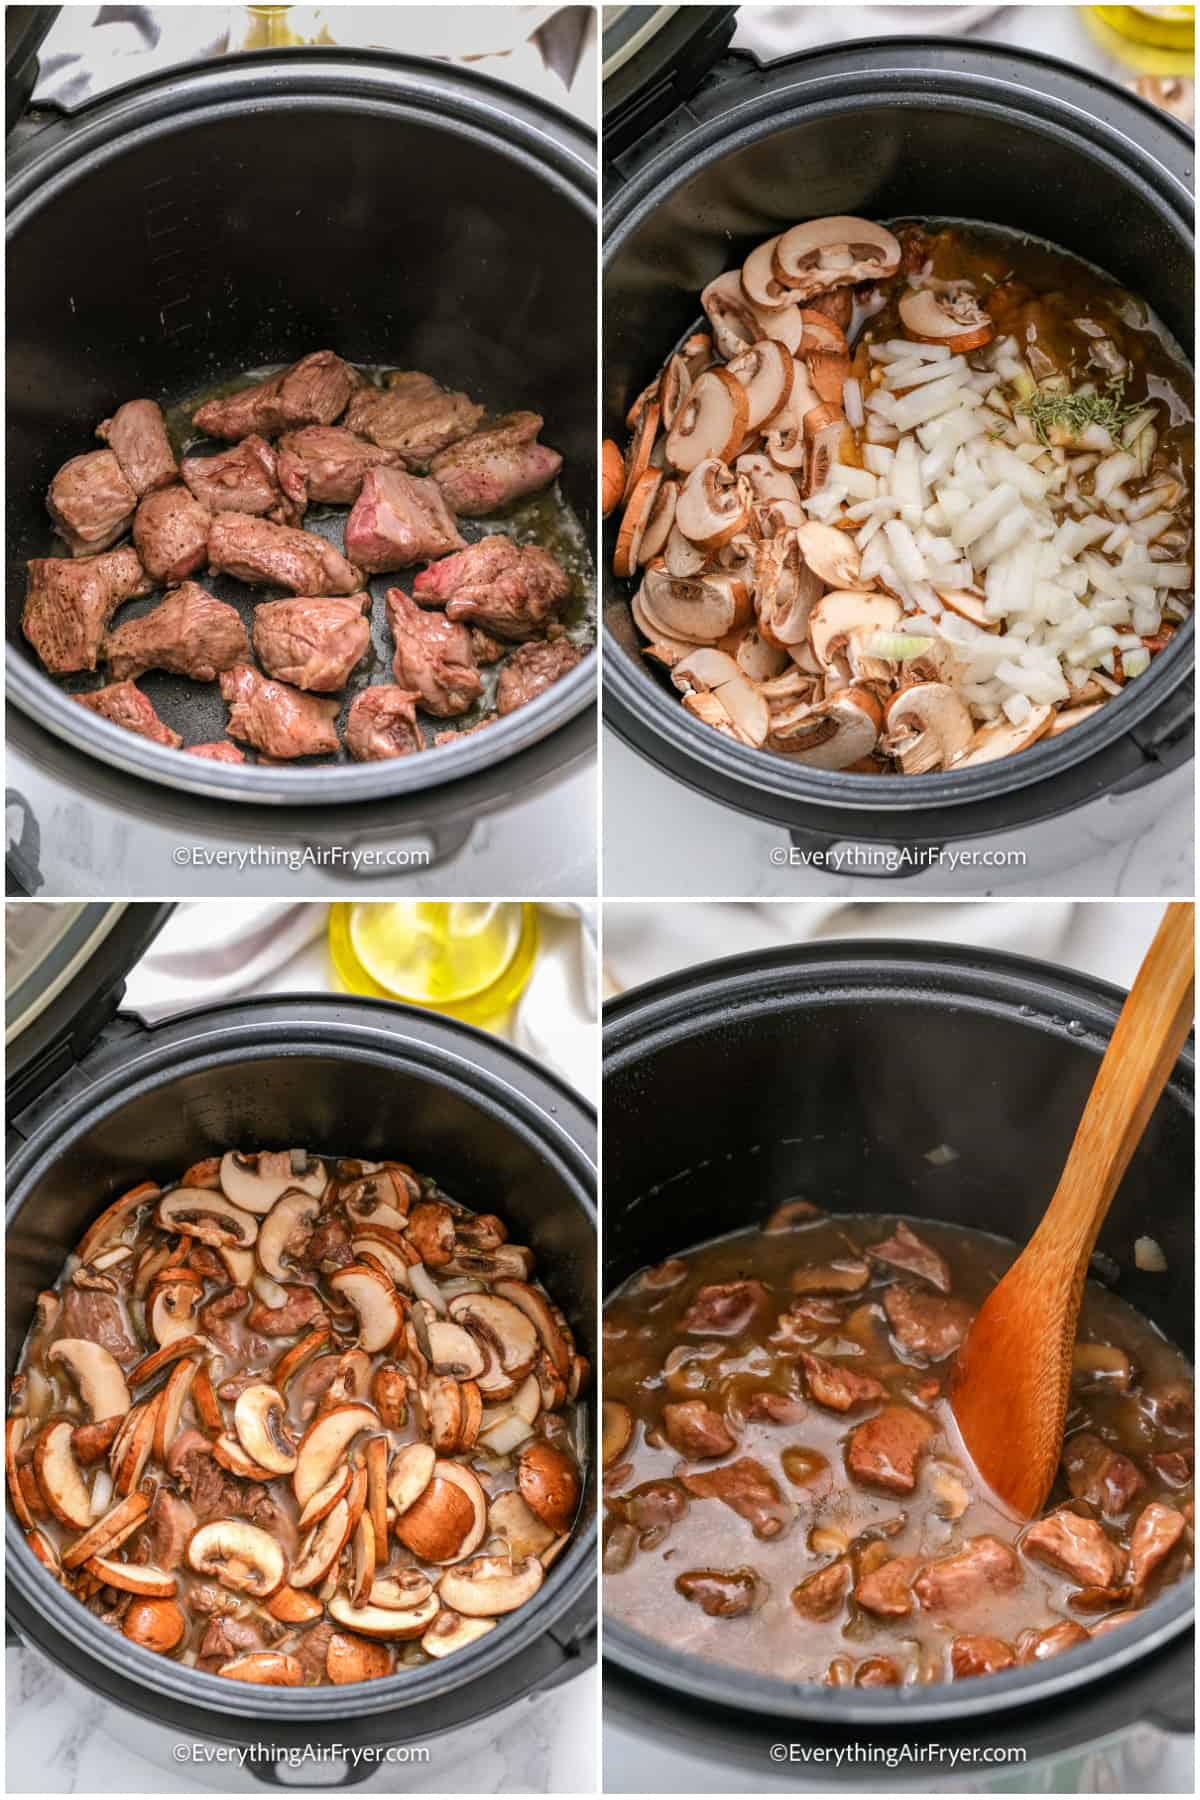 process of cooking and adding ingredients in an instant pot